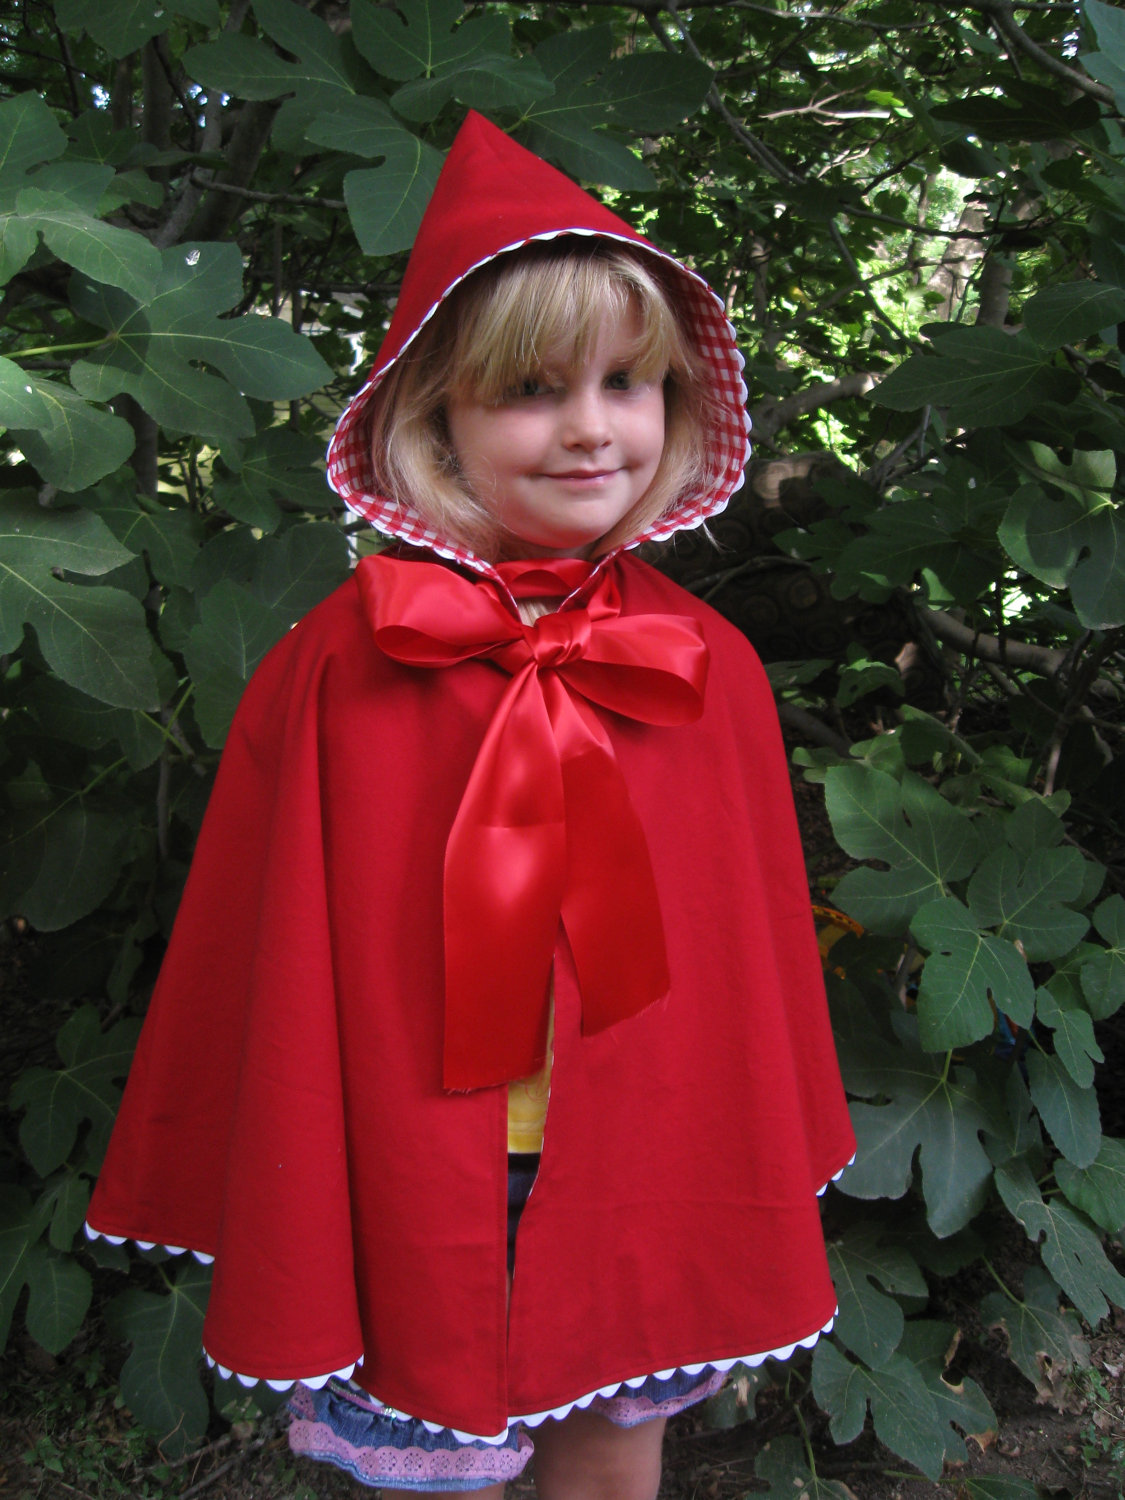 Red Riding Hood Costume for Child – Sewing Projects | BurdaStyle.com